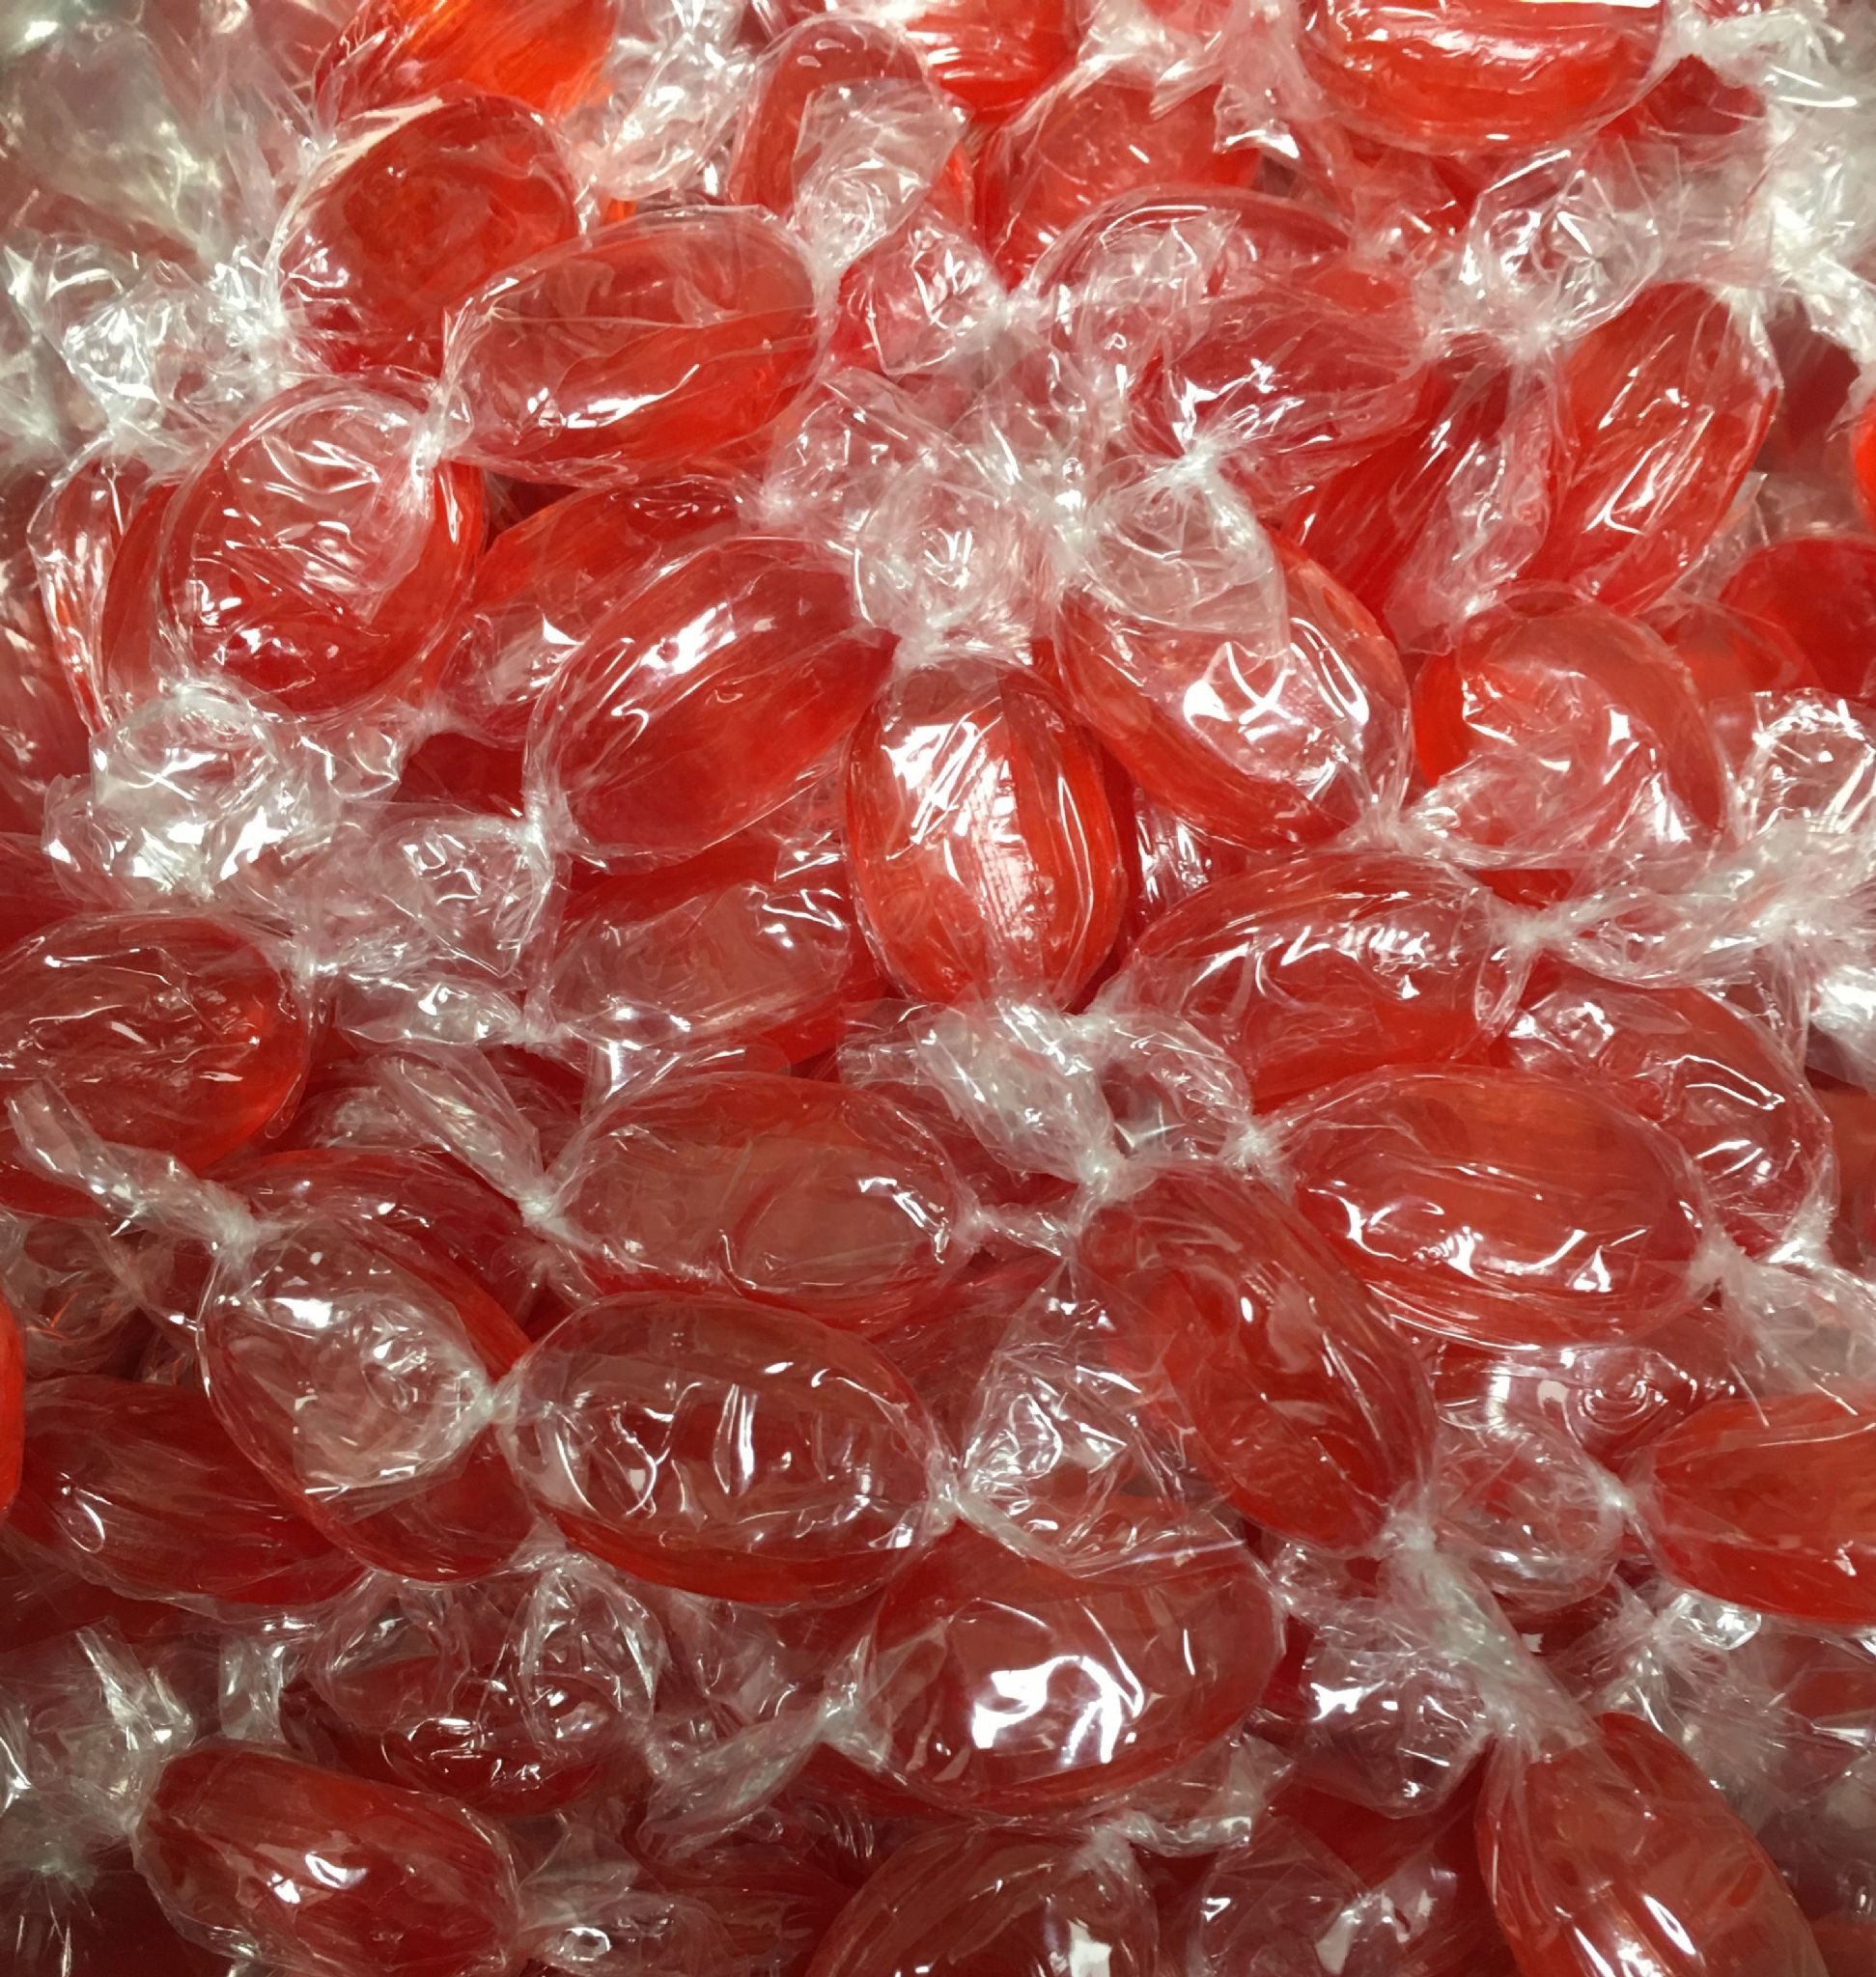 Cough Candy Sweets 100g – Bag 100g – Confection Affection